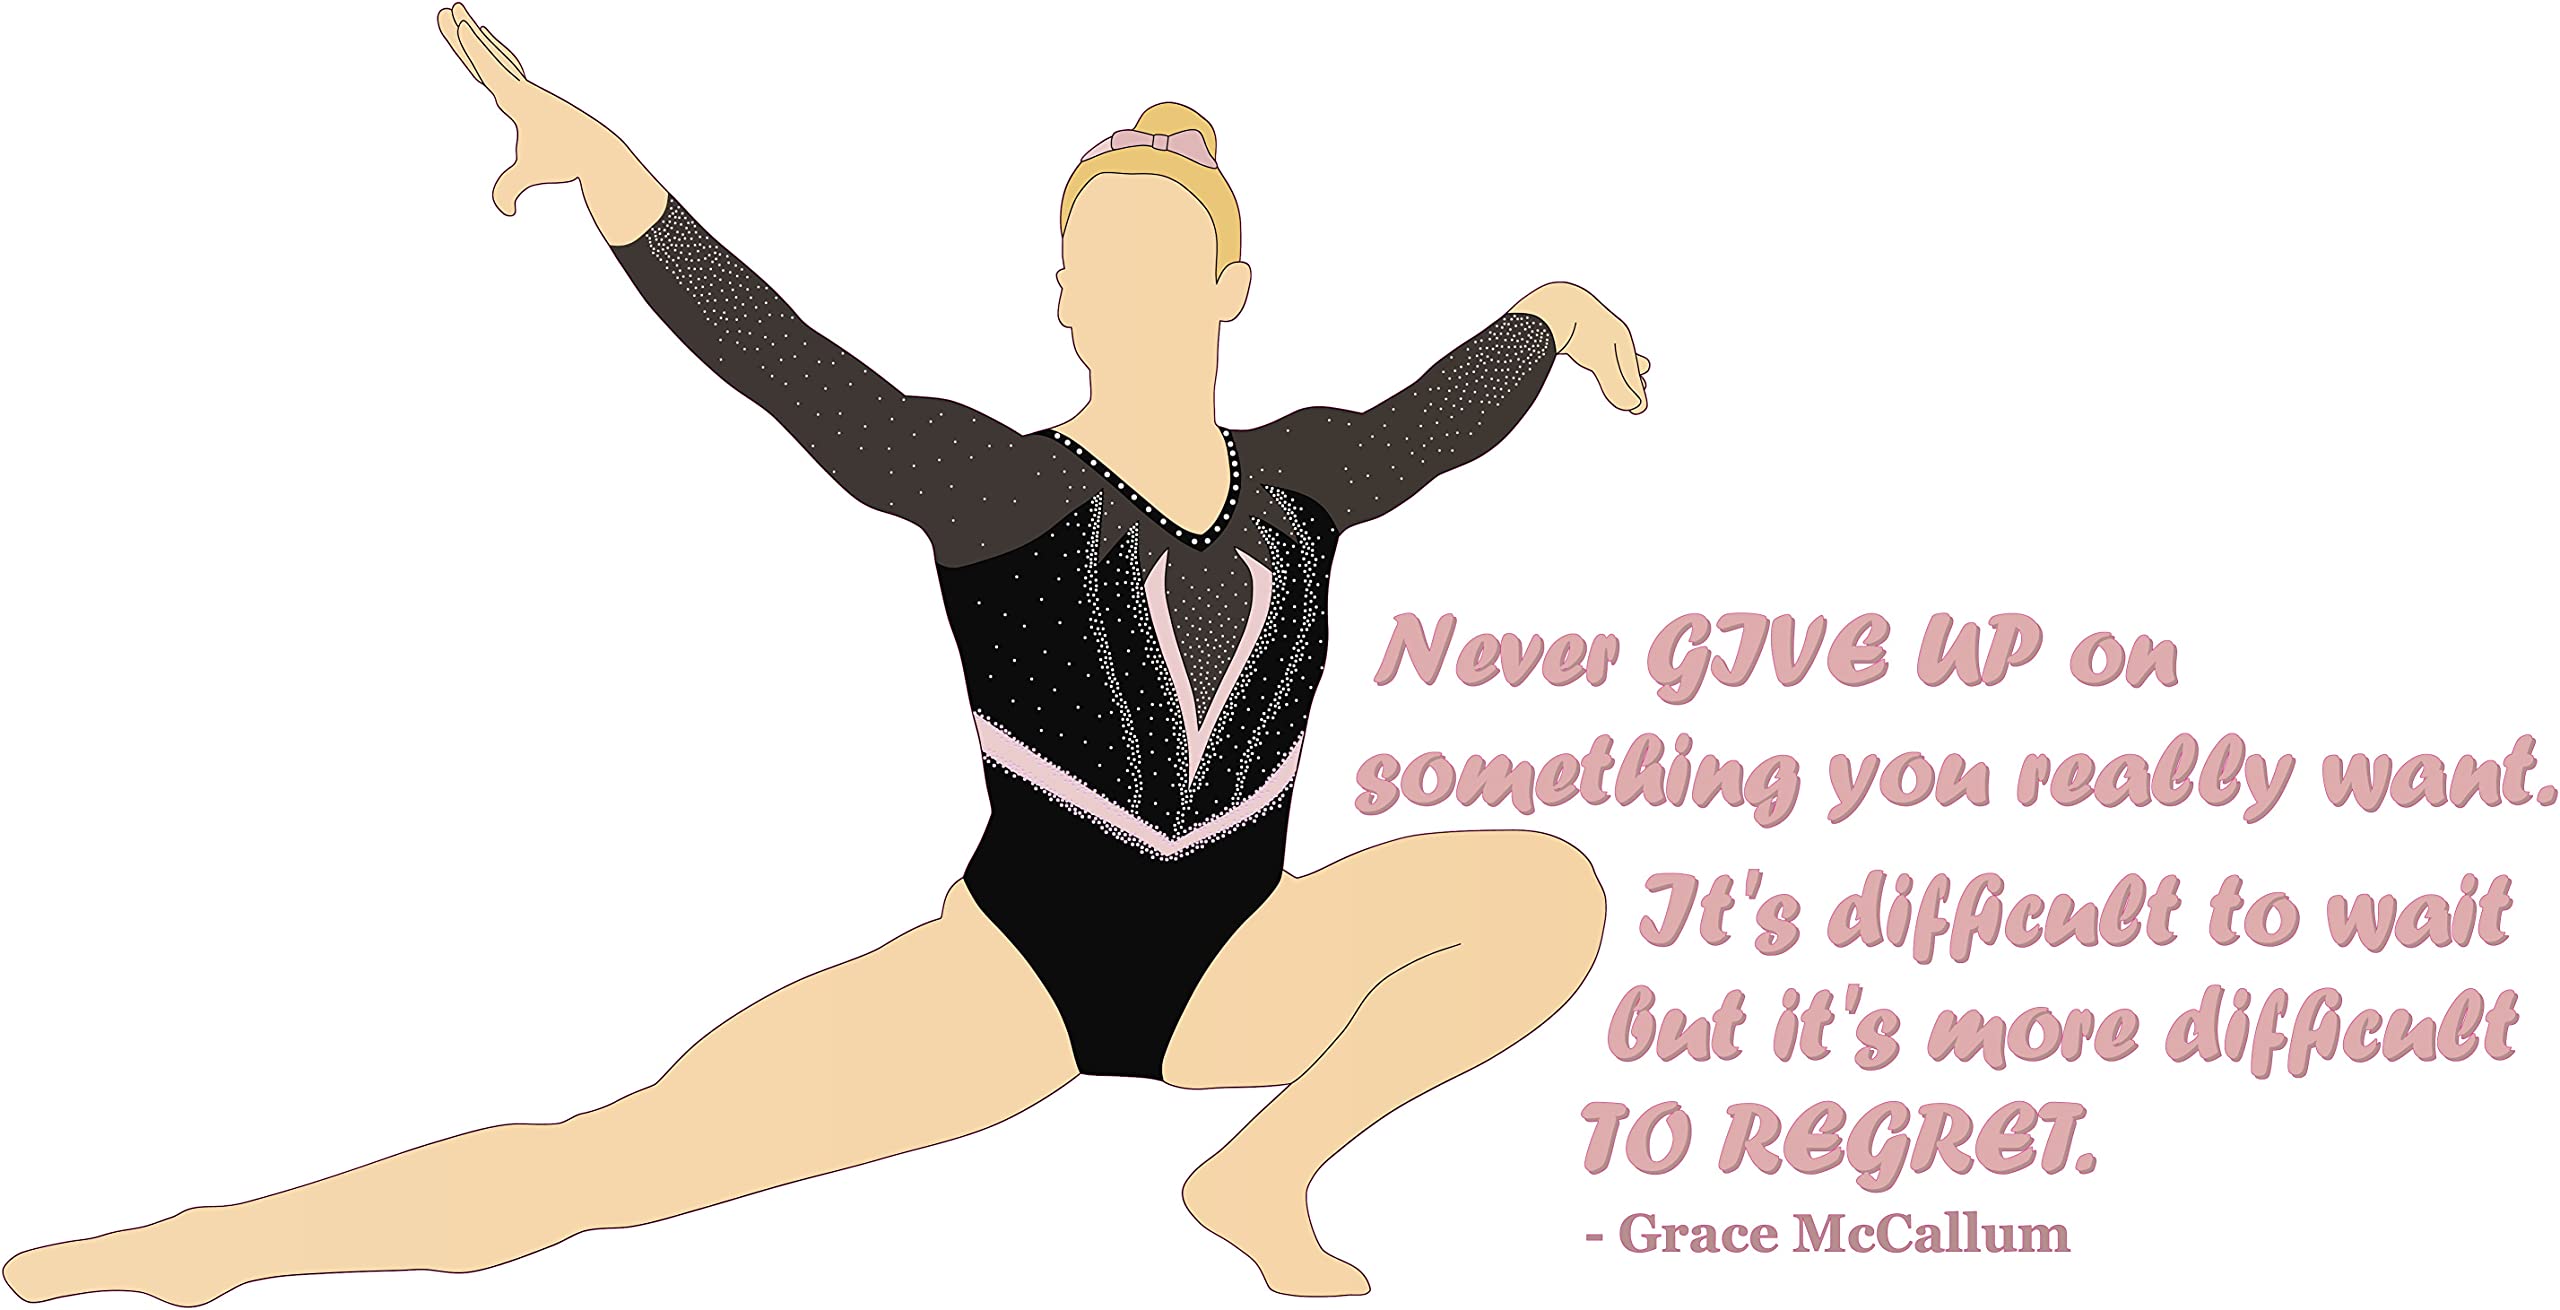 Defying Gravity: Inspiring gymnastics quotes for Pushing Your Limits